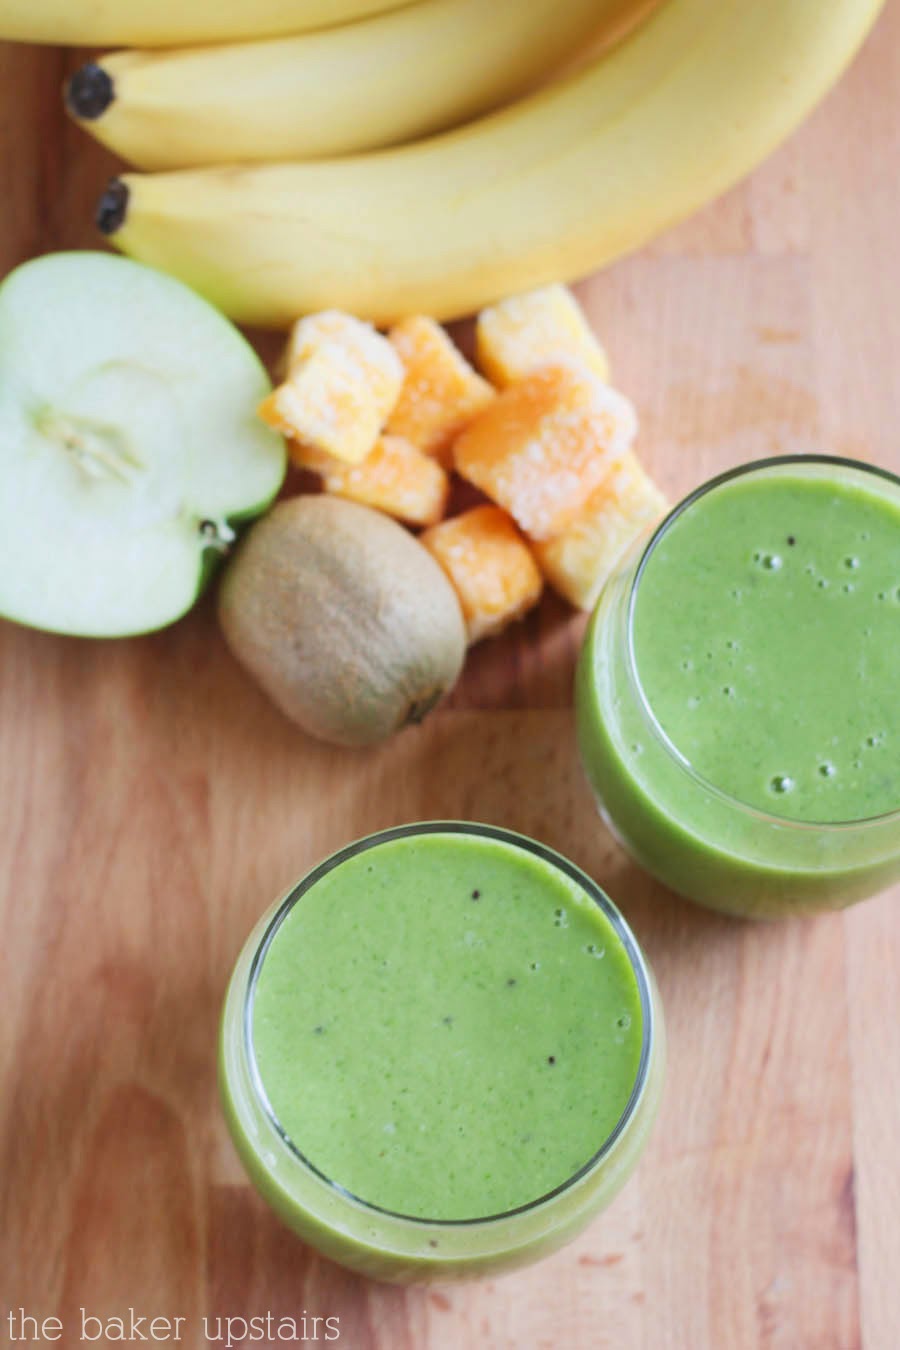 This tropical green smoothie is so creamy and delicious, and full of flavor! It's easy to make and a great way to start the day!